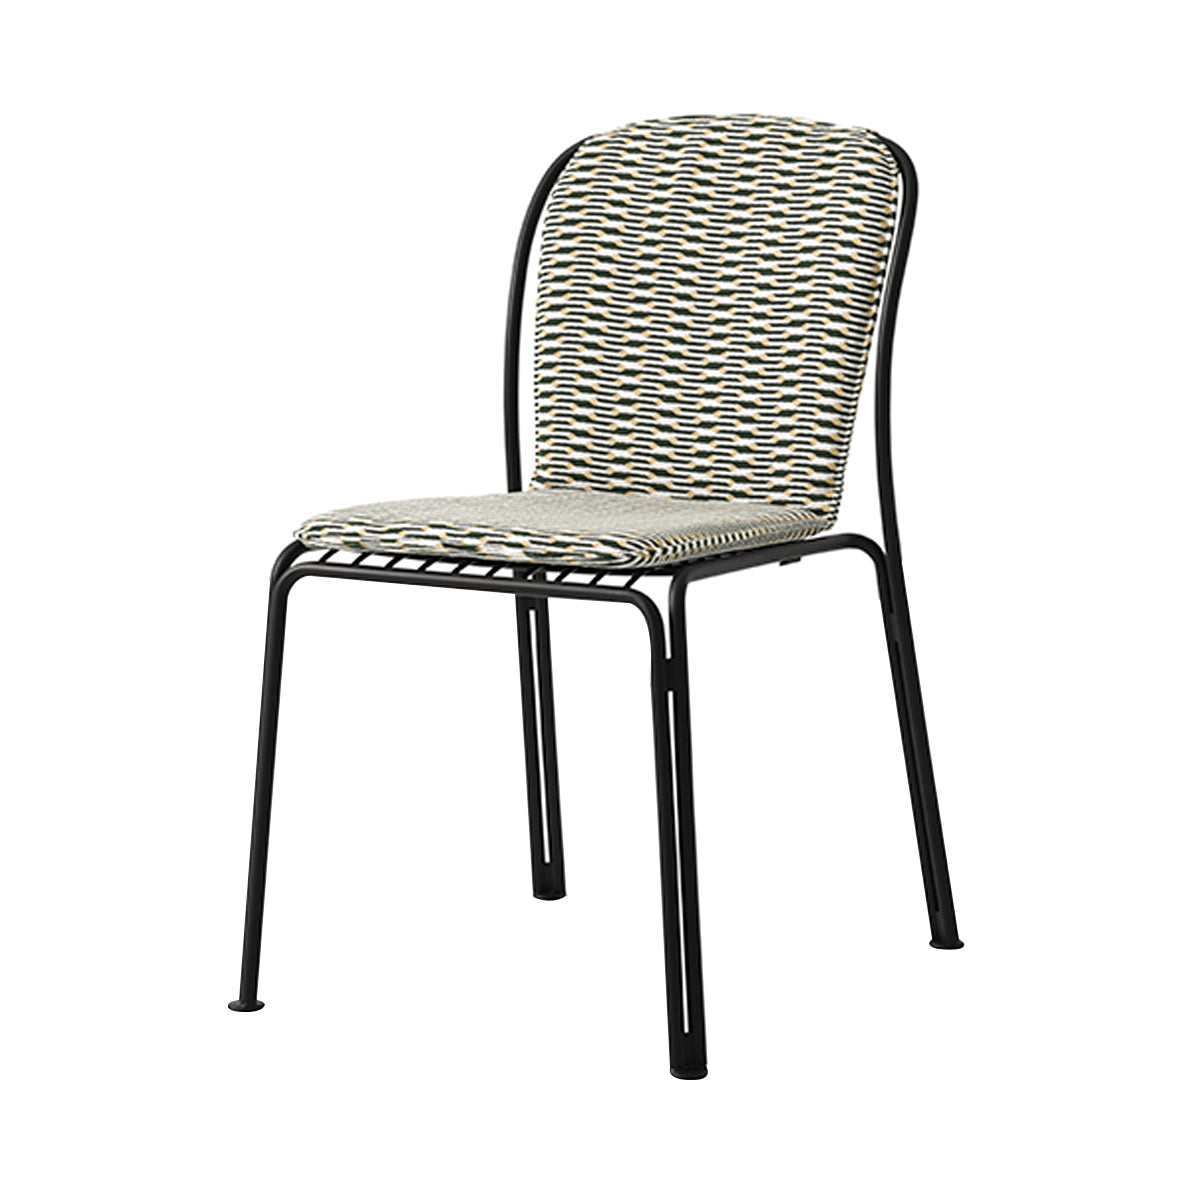 Thorvald SC94 Side Chair: Outdoor + Warm Black + With Marquetry Bora Cushion